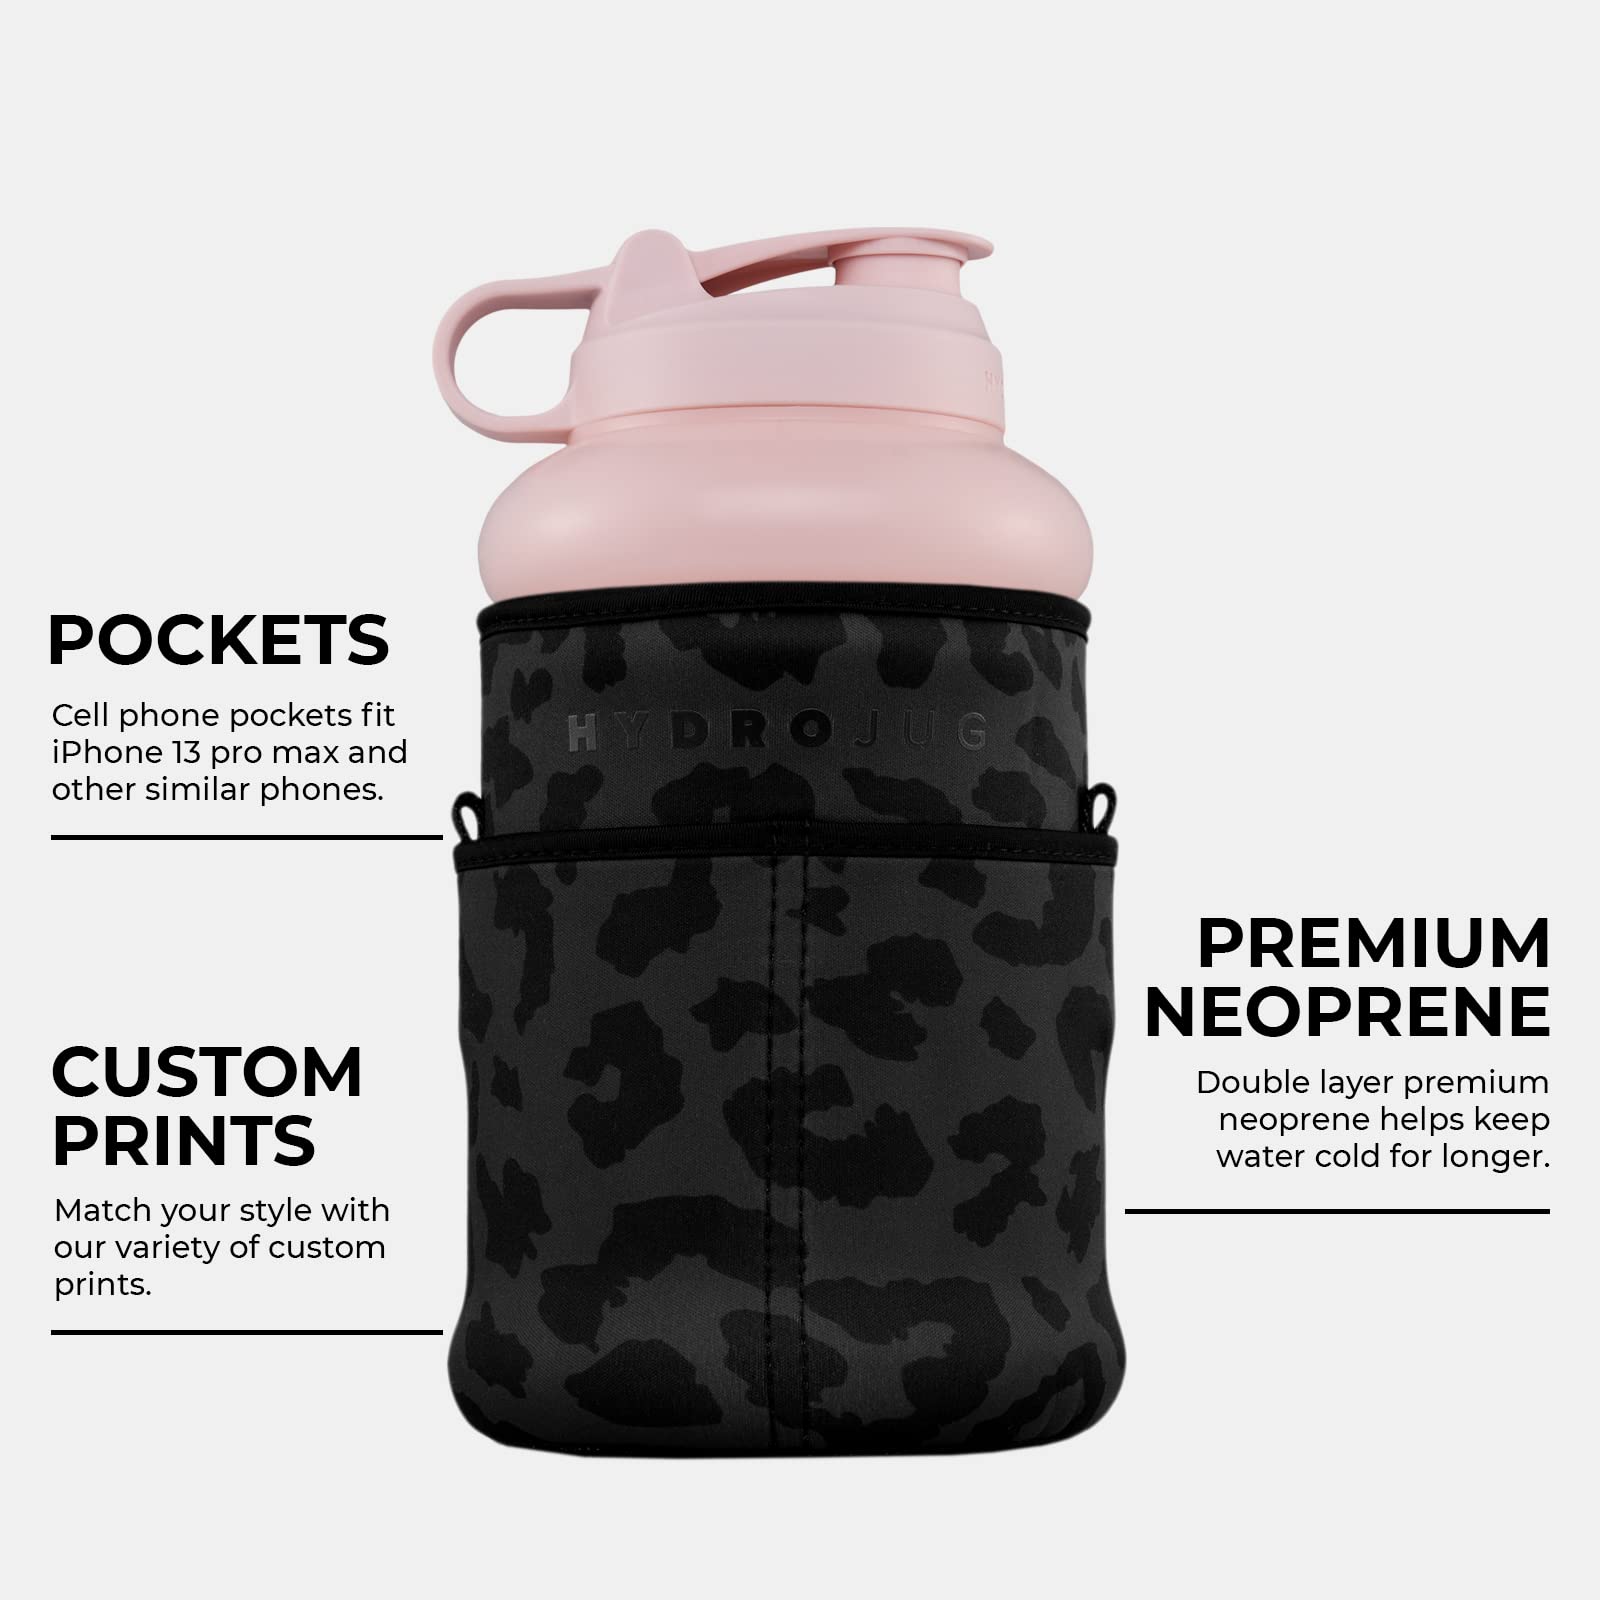 Hydrojug Sleeve - Multi-Pocket Insulated Neoprene Pouch for 73oz Half-Gallon - Opticdeals